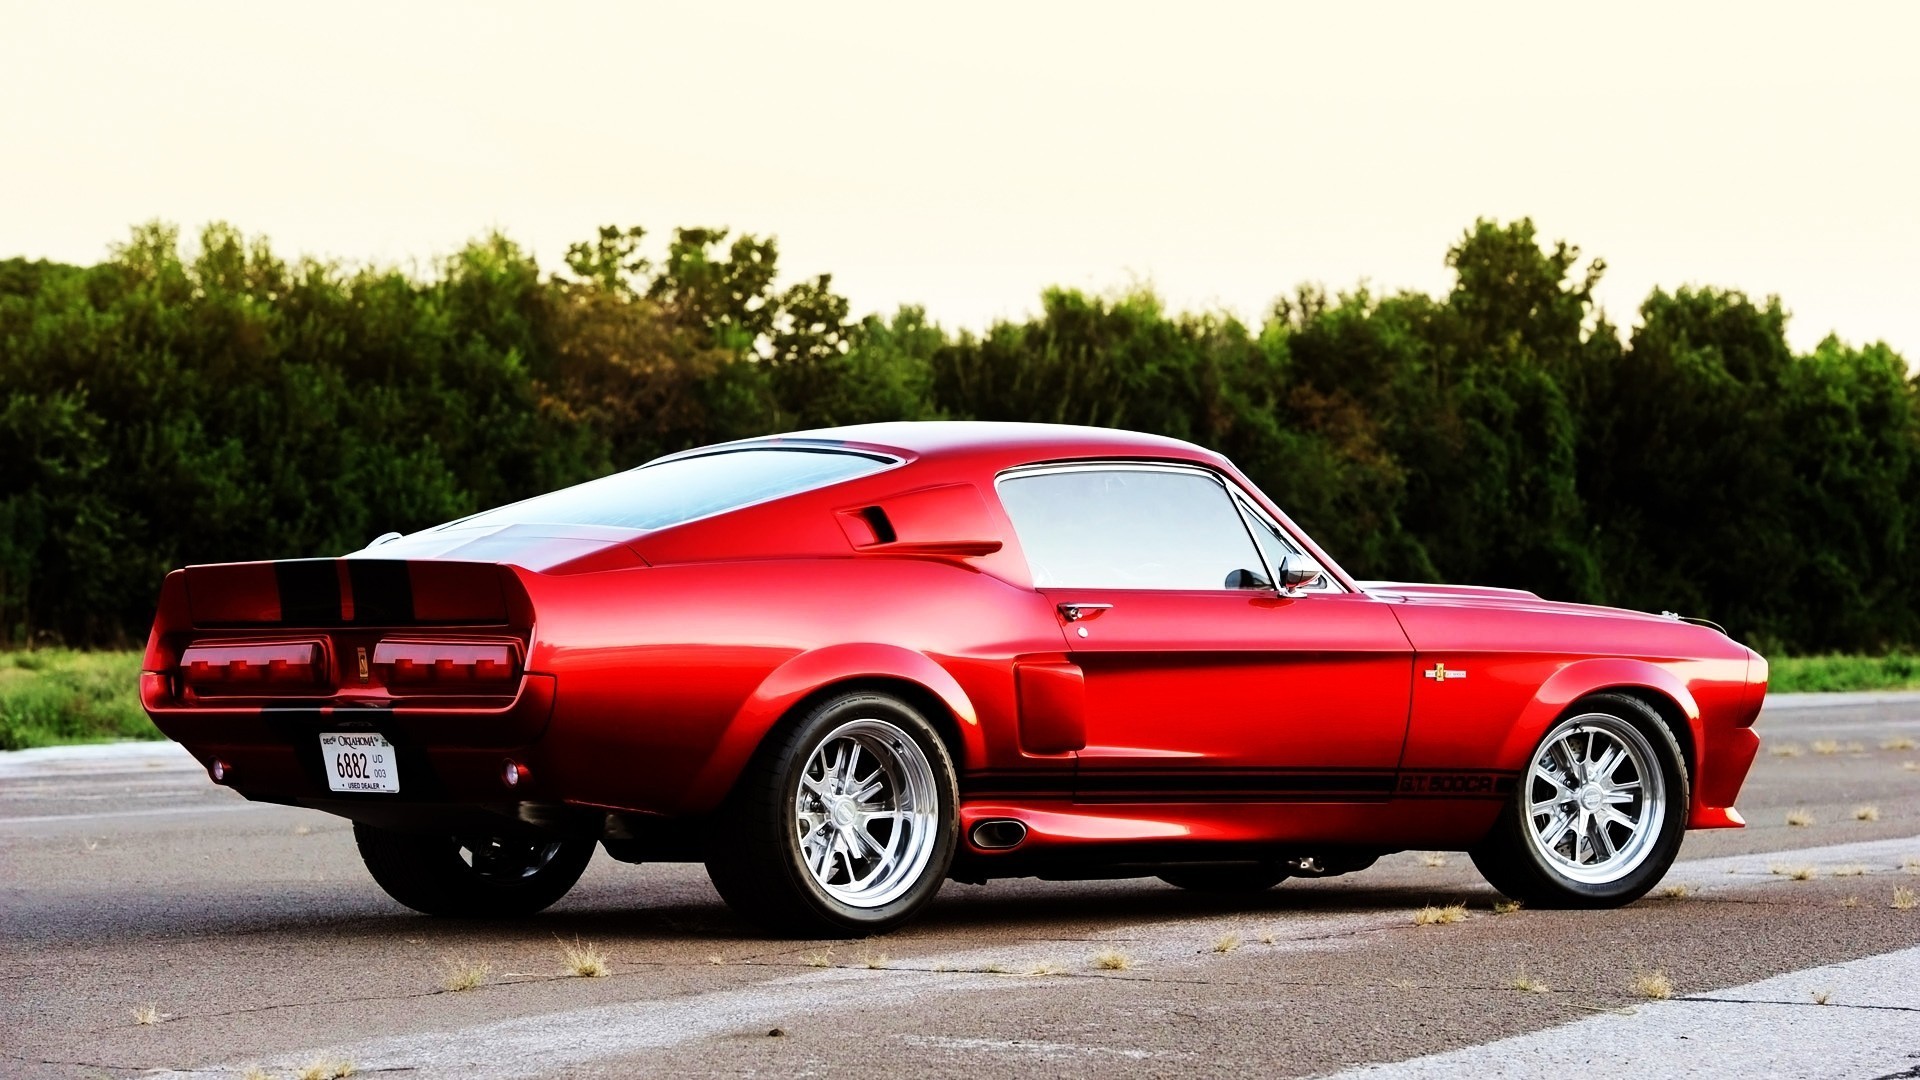 Ford Gt500 Shelby Mustang Wallpaper